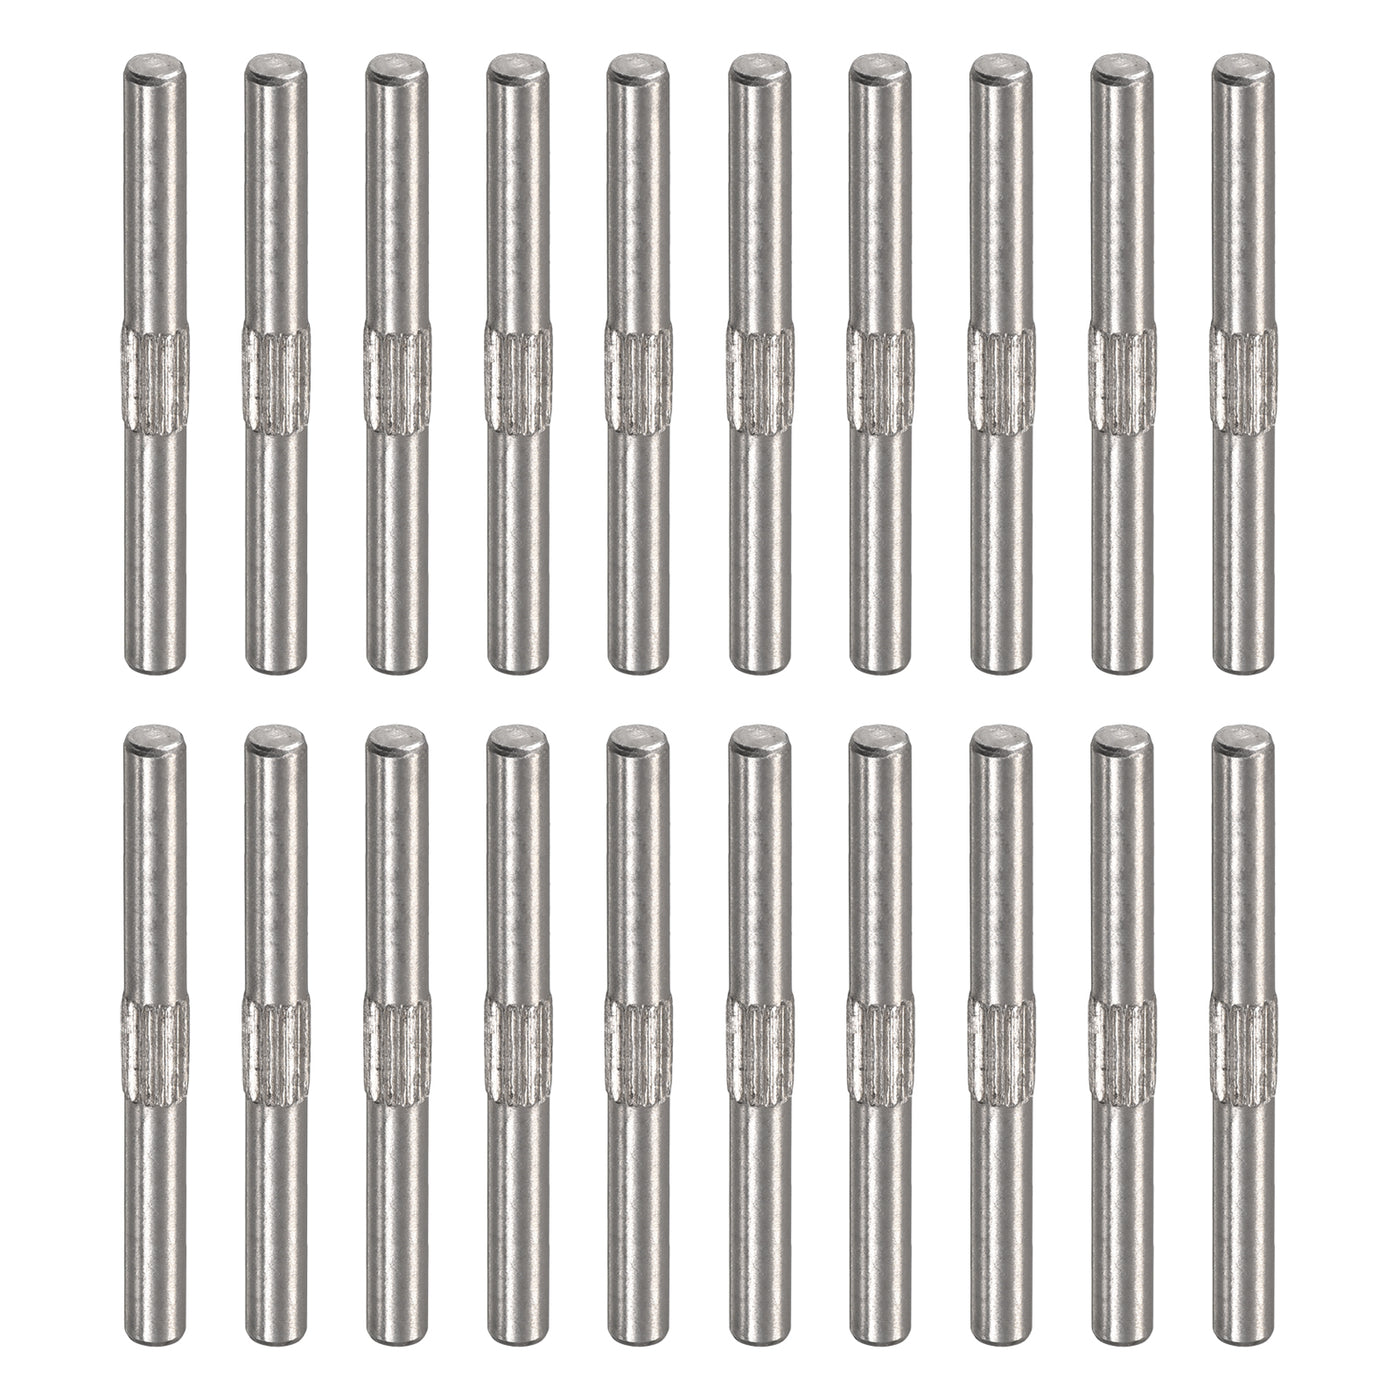 uxcell Uxcell 3x30mm 304 Stainless Steel Dowel Pins, 20Pcs Center Knurled Chamfered End Pin